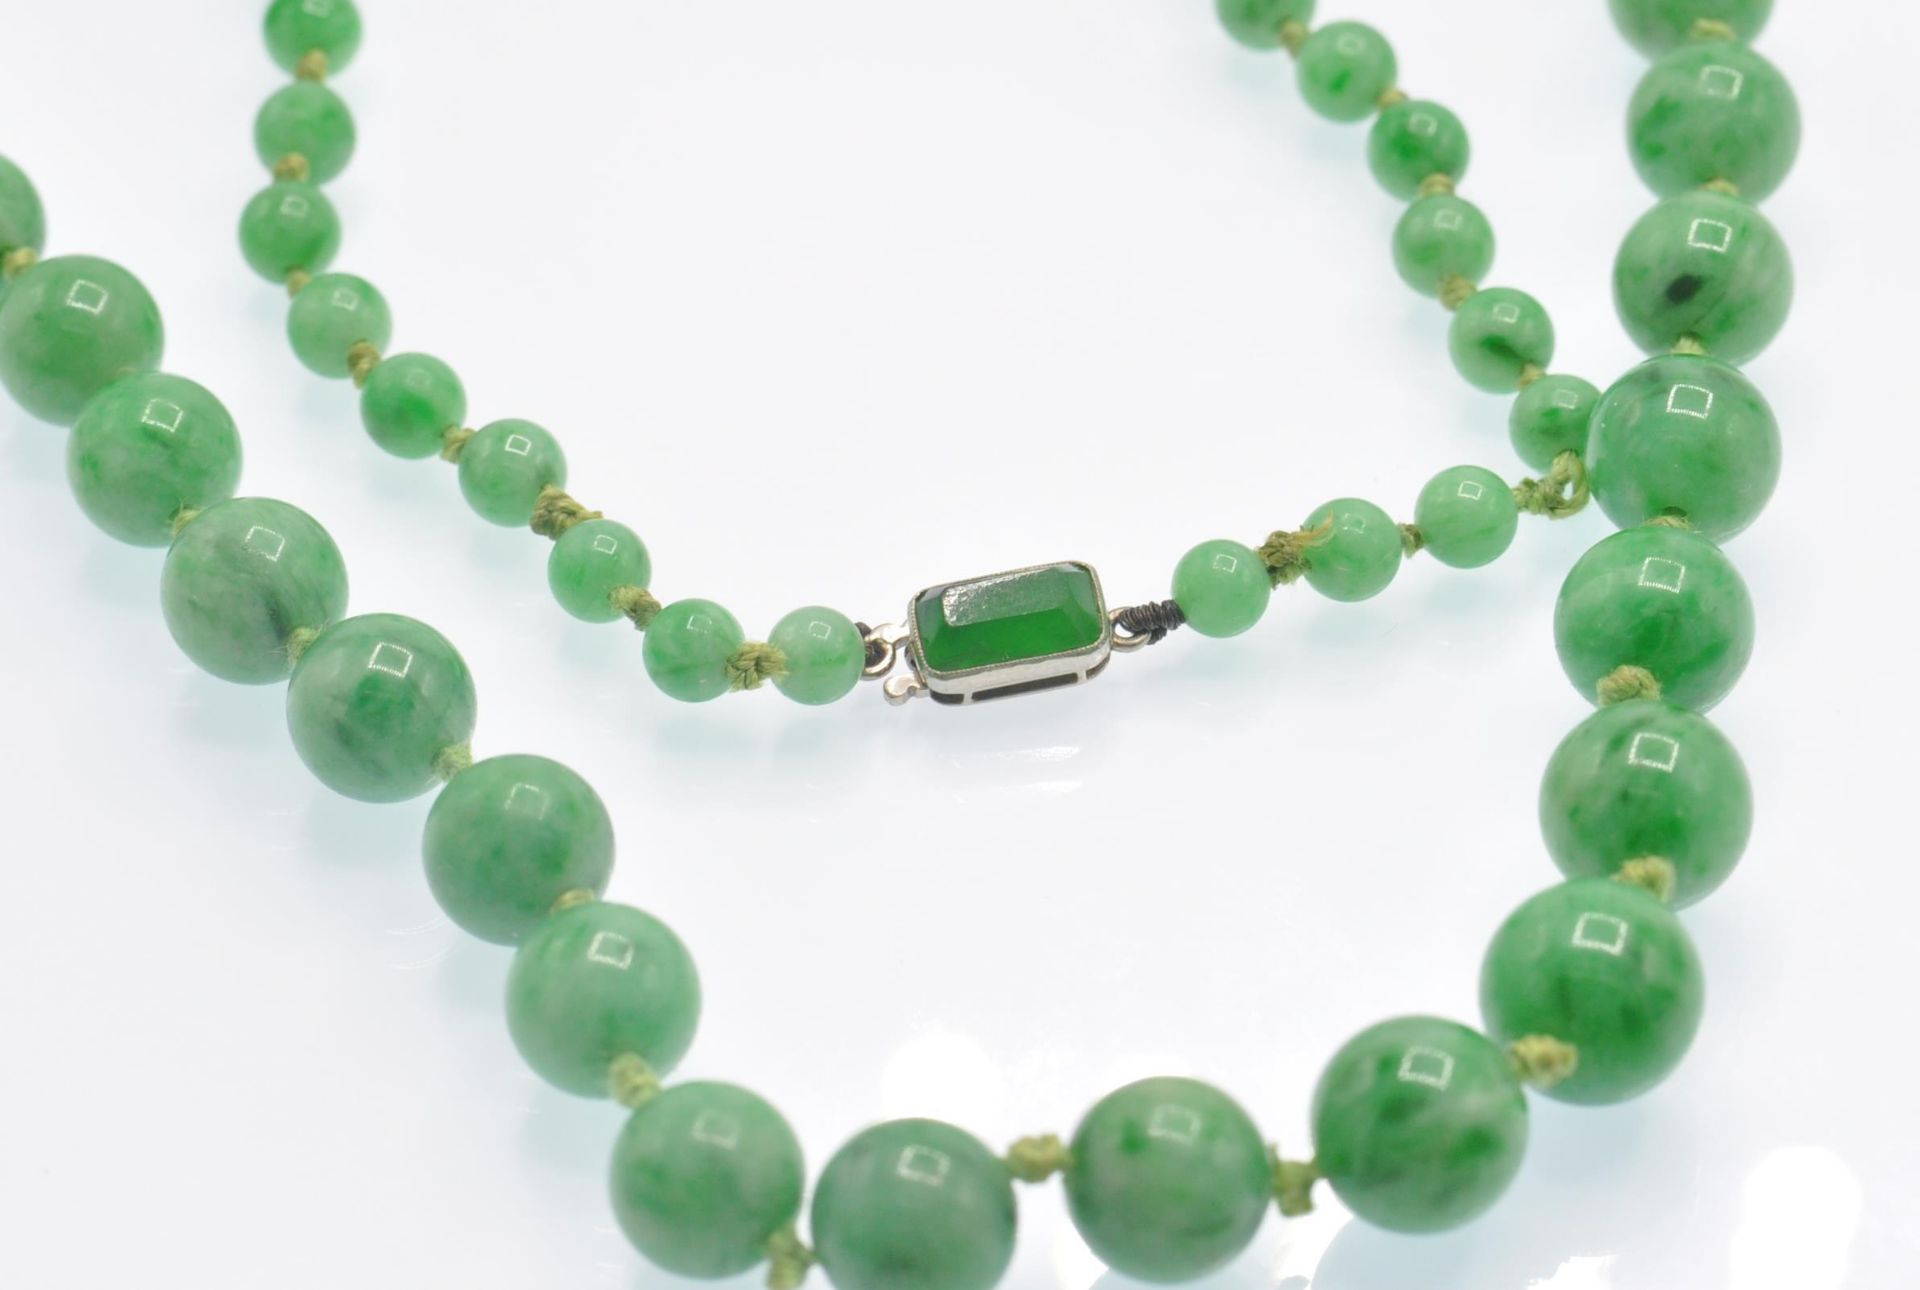 An Antique Jade Bead Necklace - Image 6 of 6